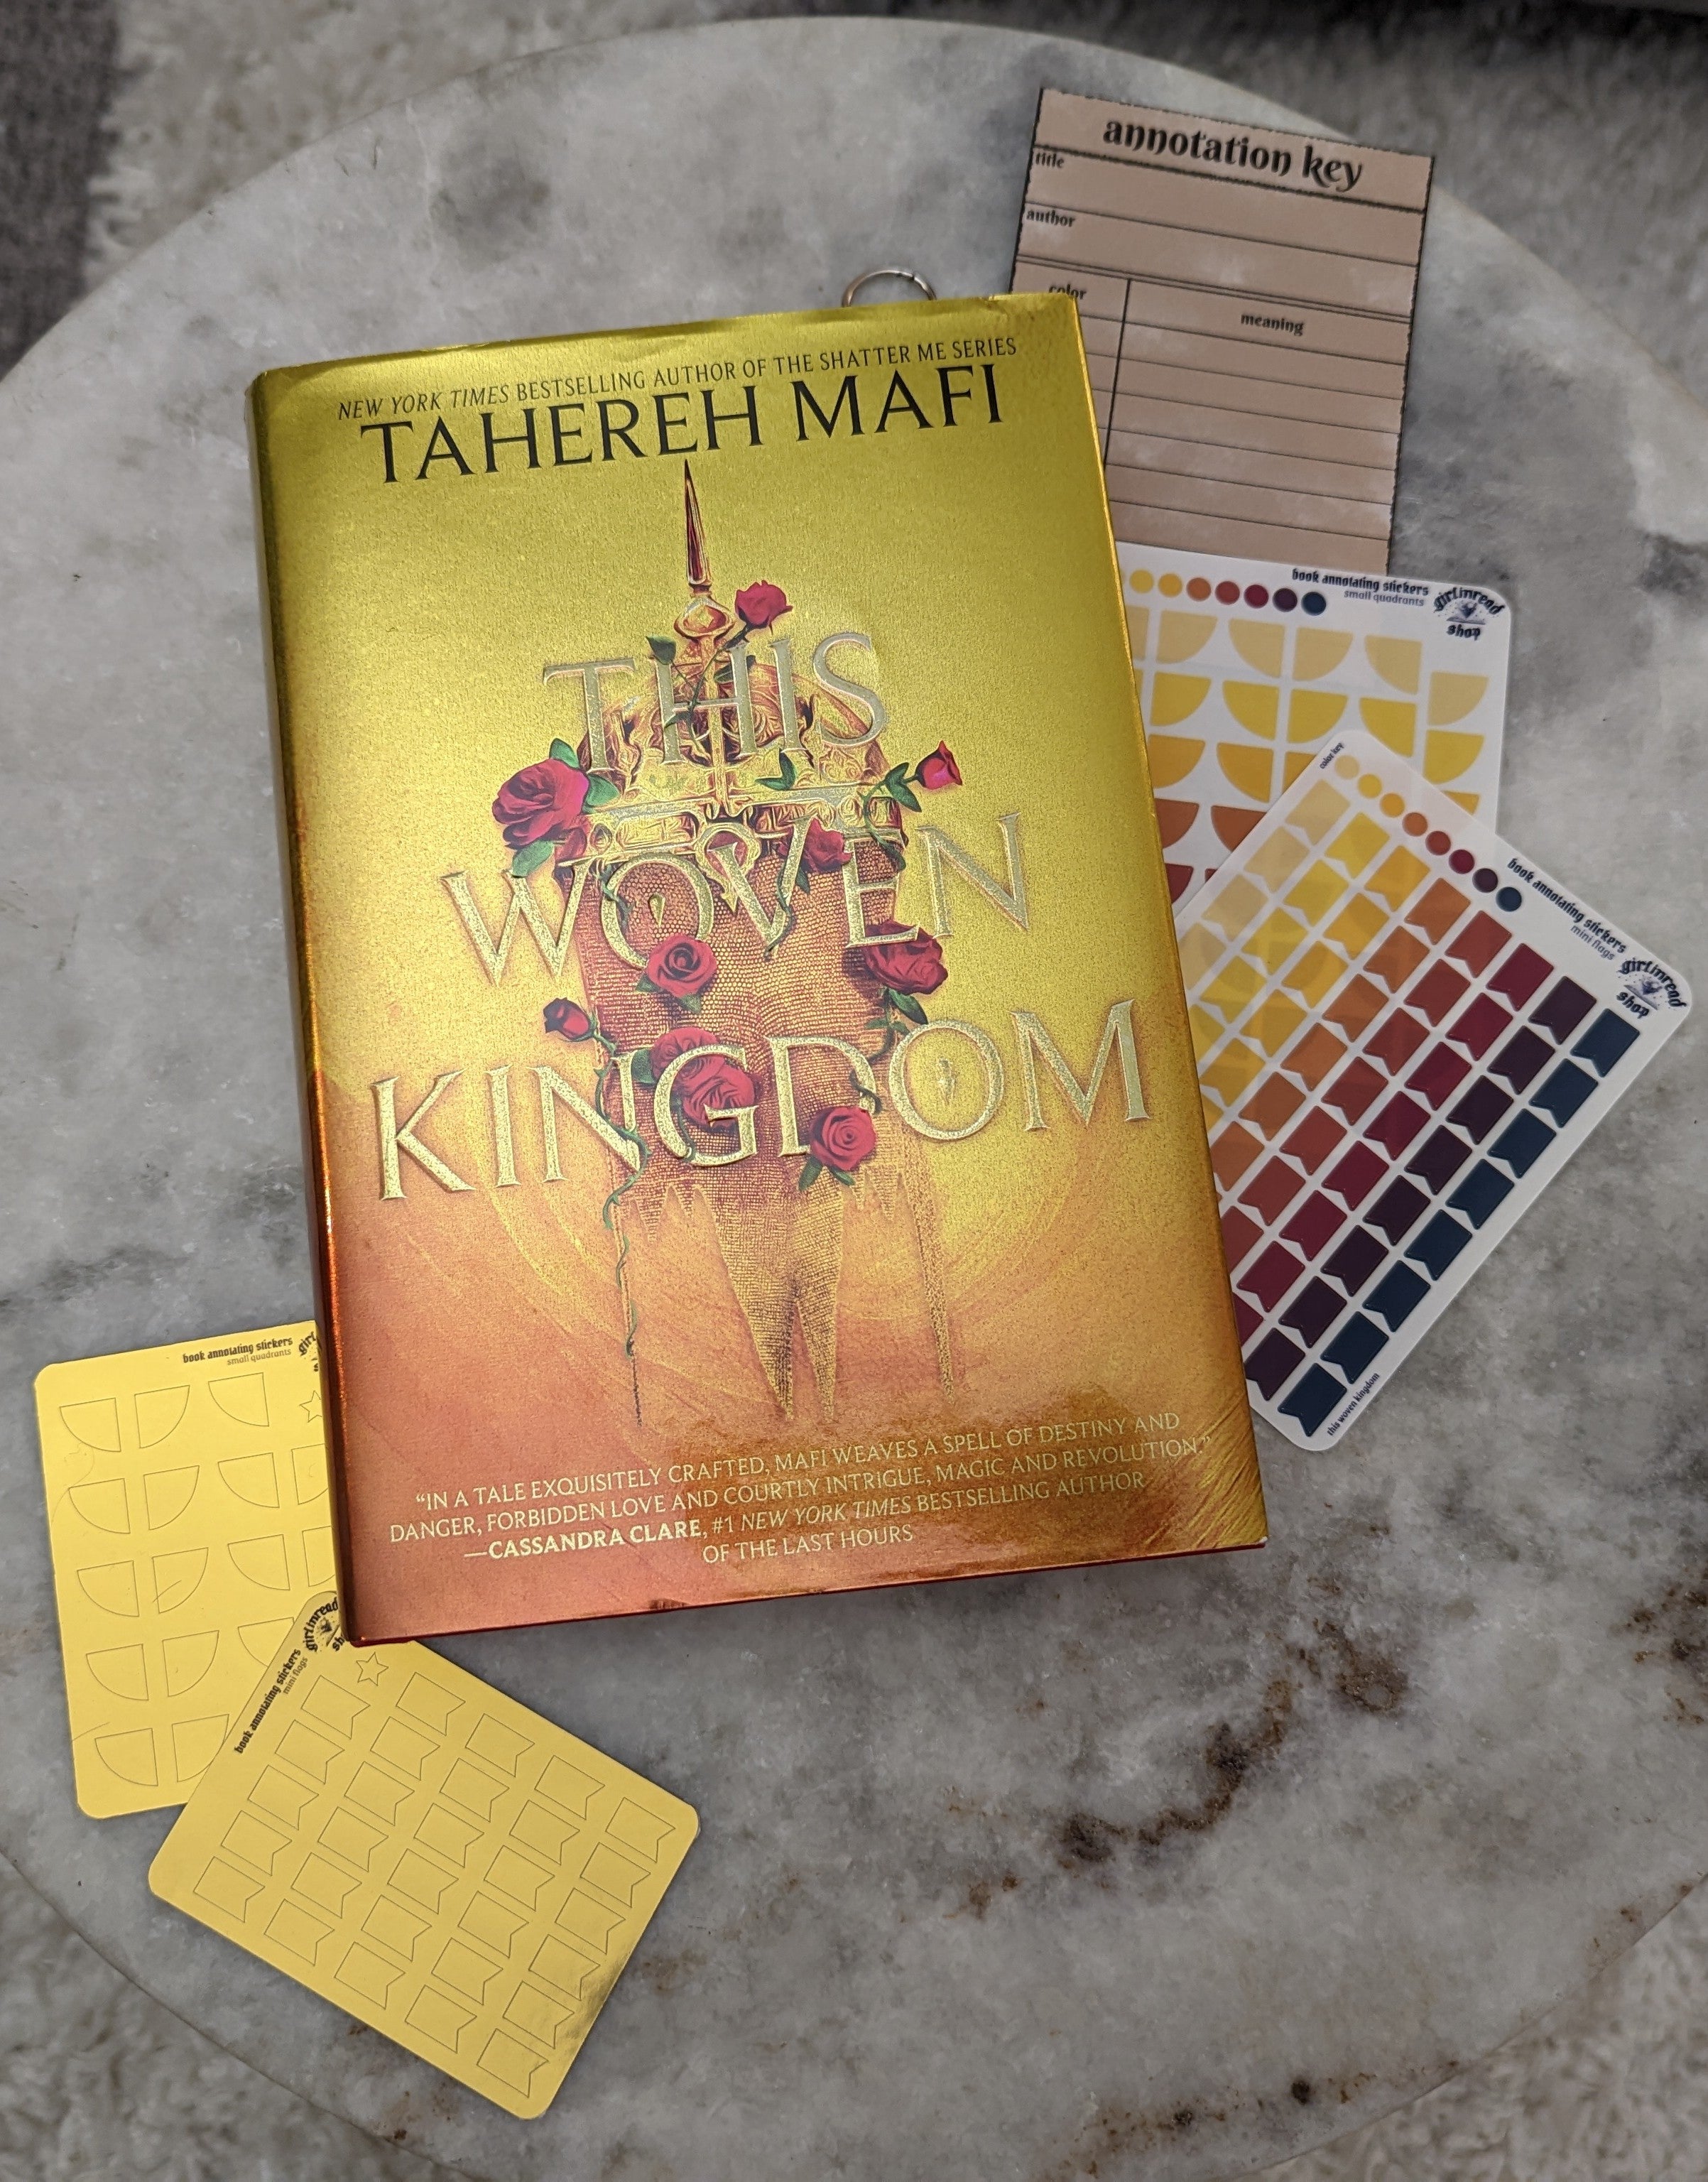 starter kits & sets – girlinread annotating stickers